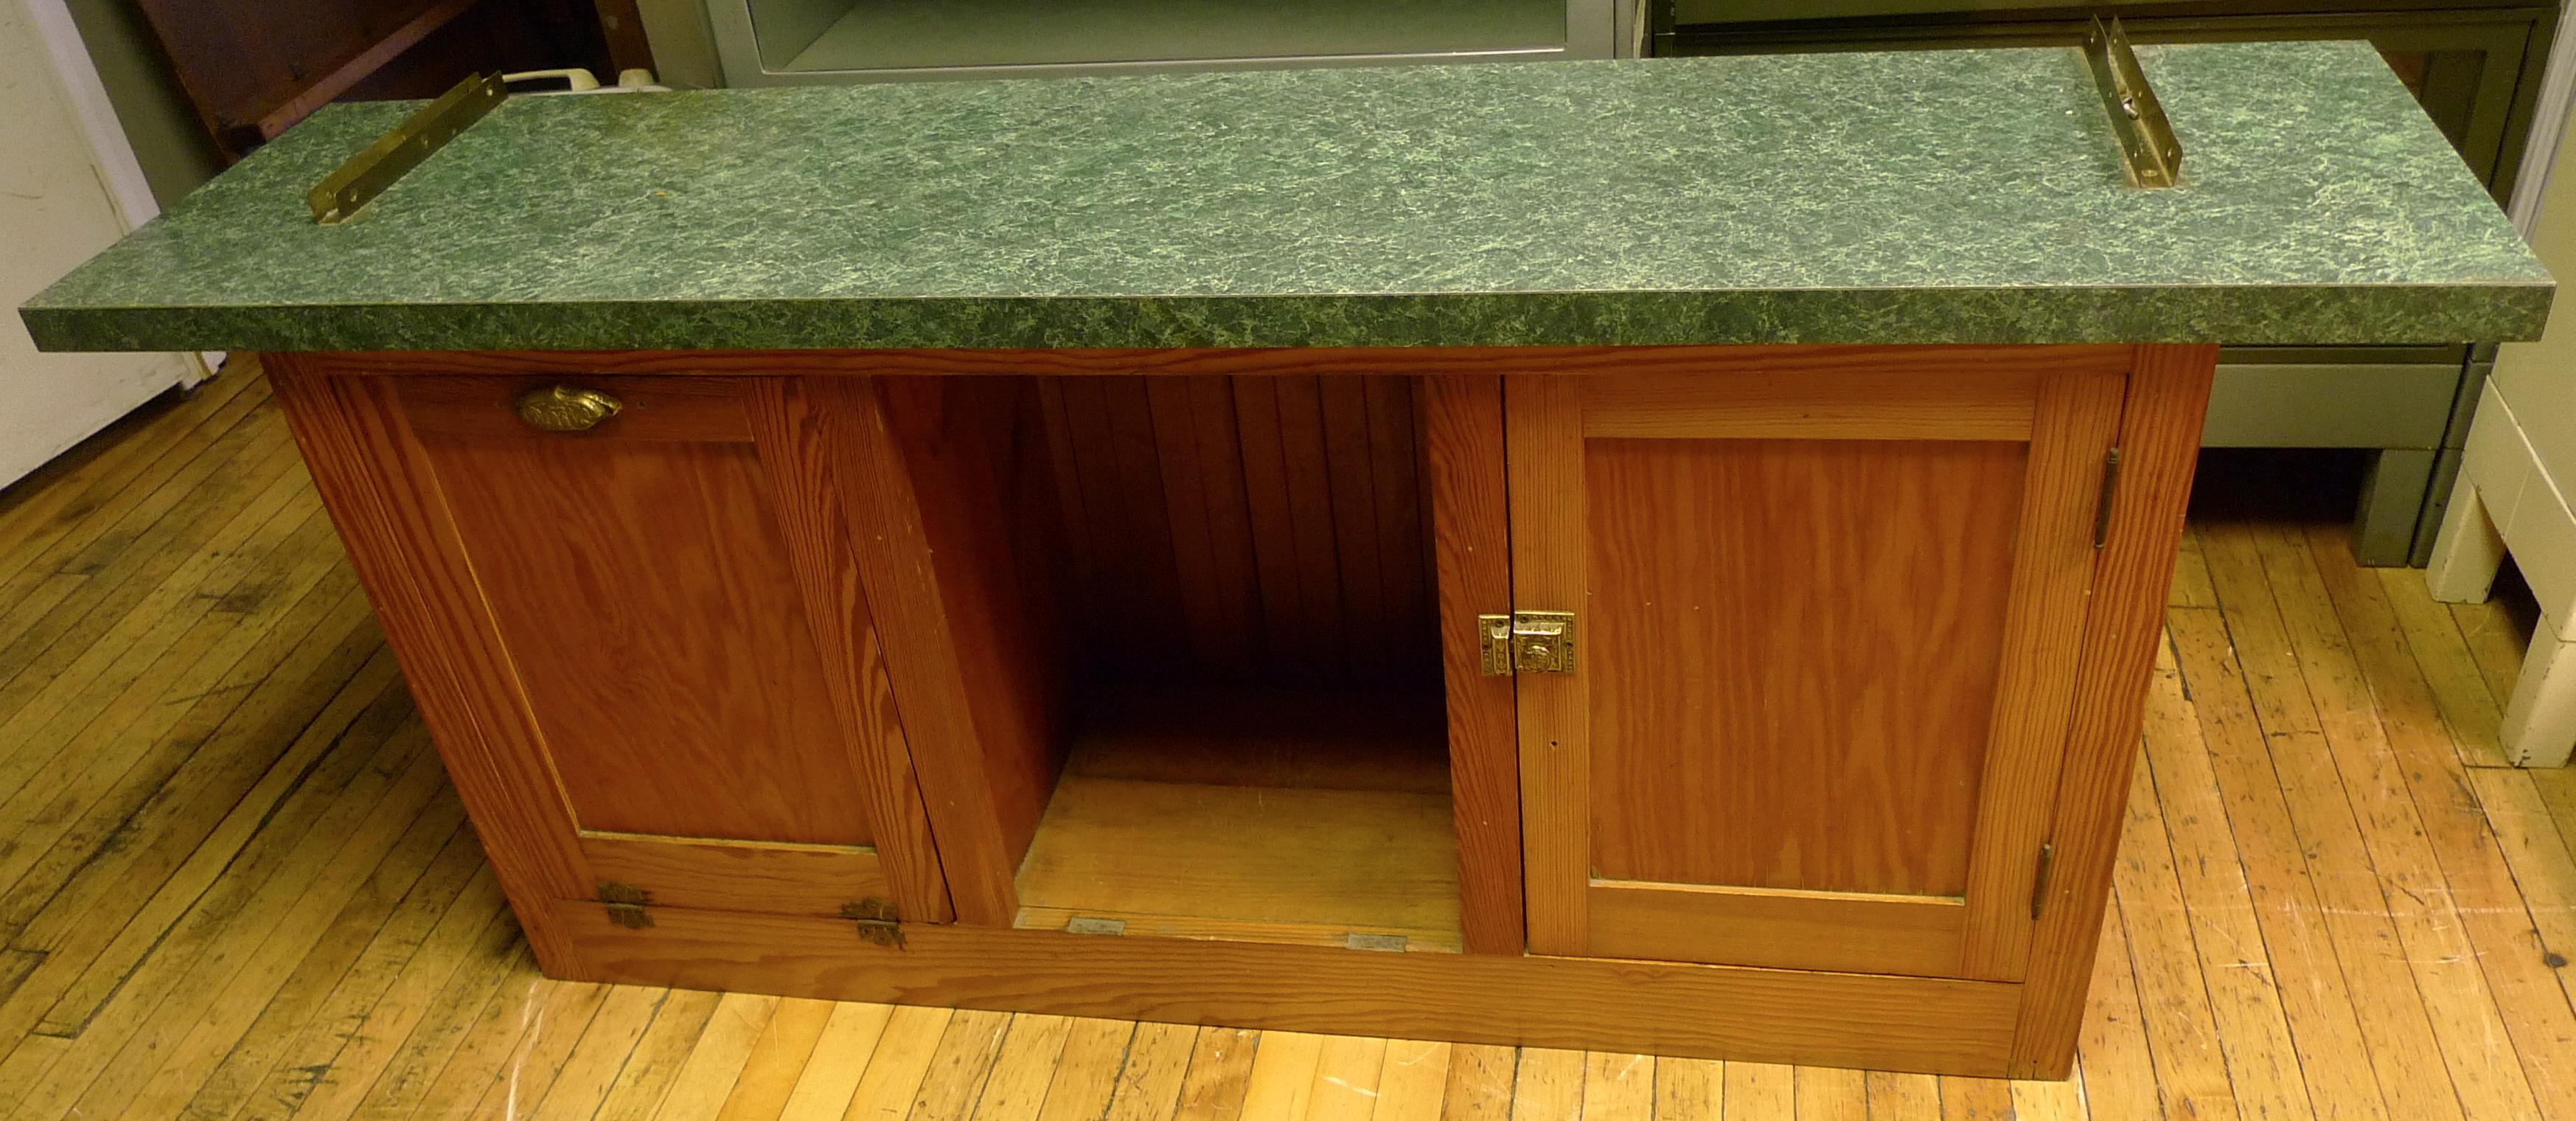 Cabinet for Kitchen Dining Room Storage from Historic Chicago Pullman Home 1920s For Sale 2